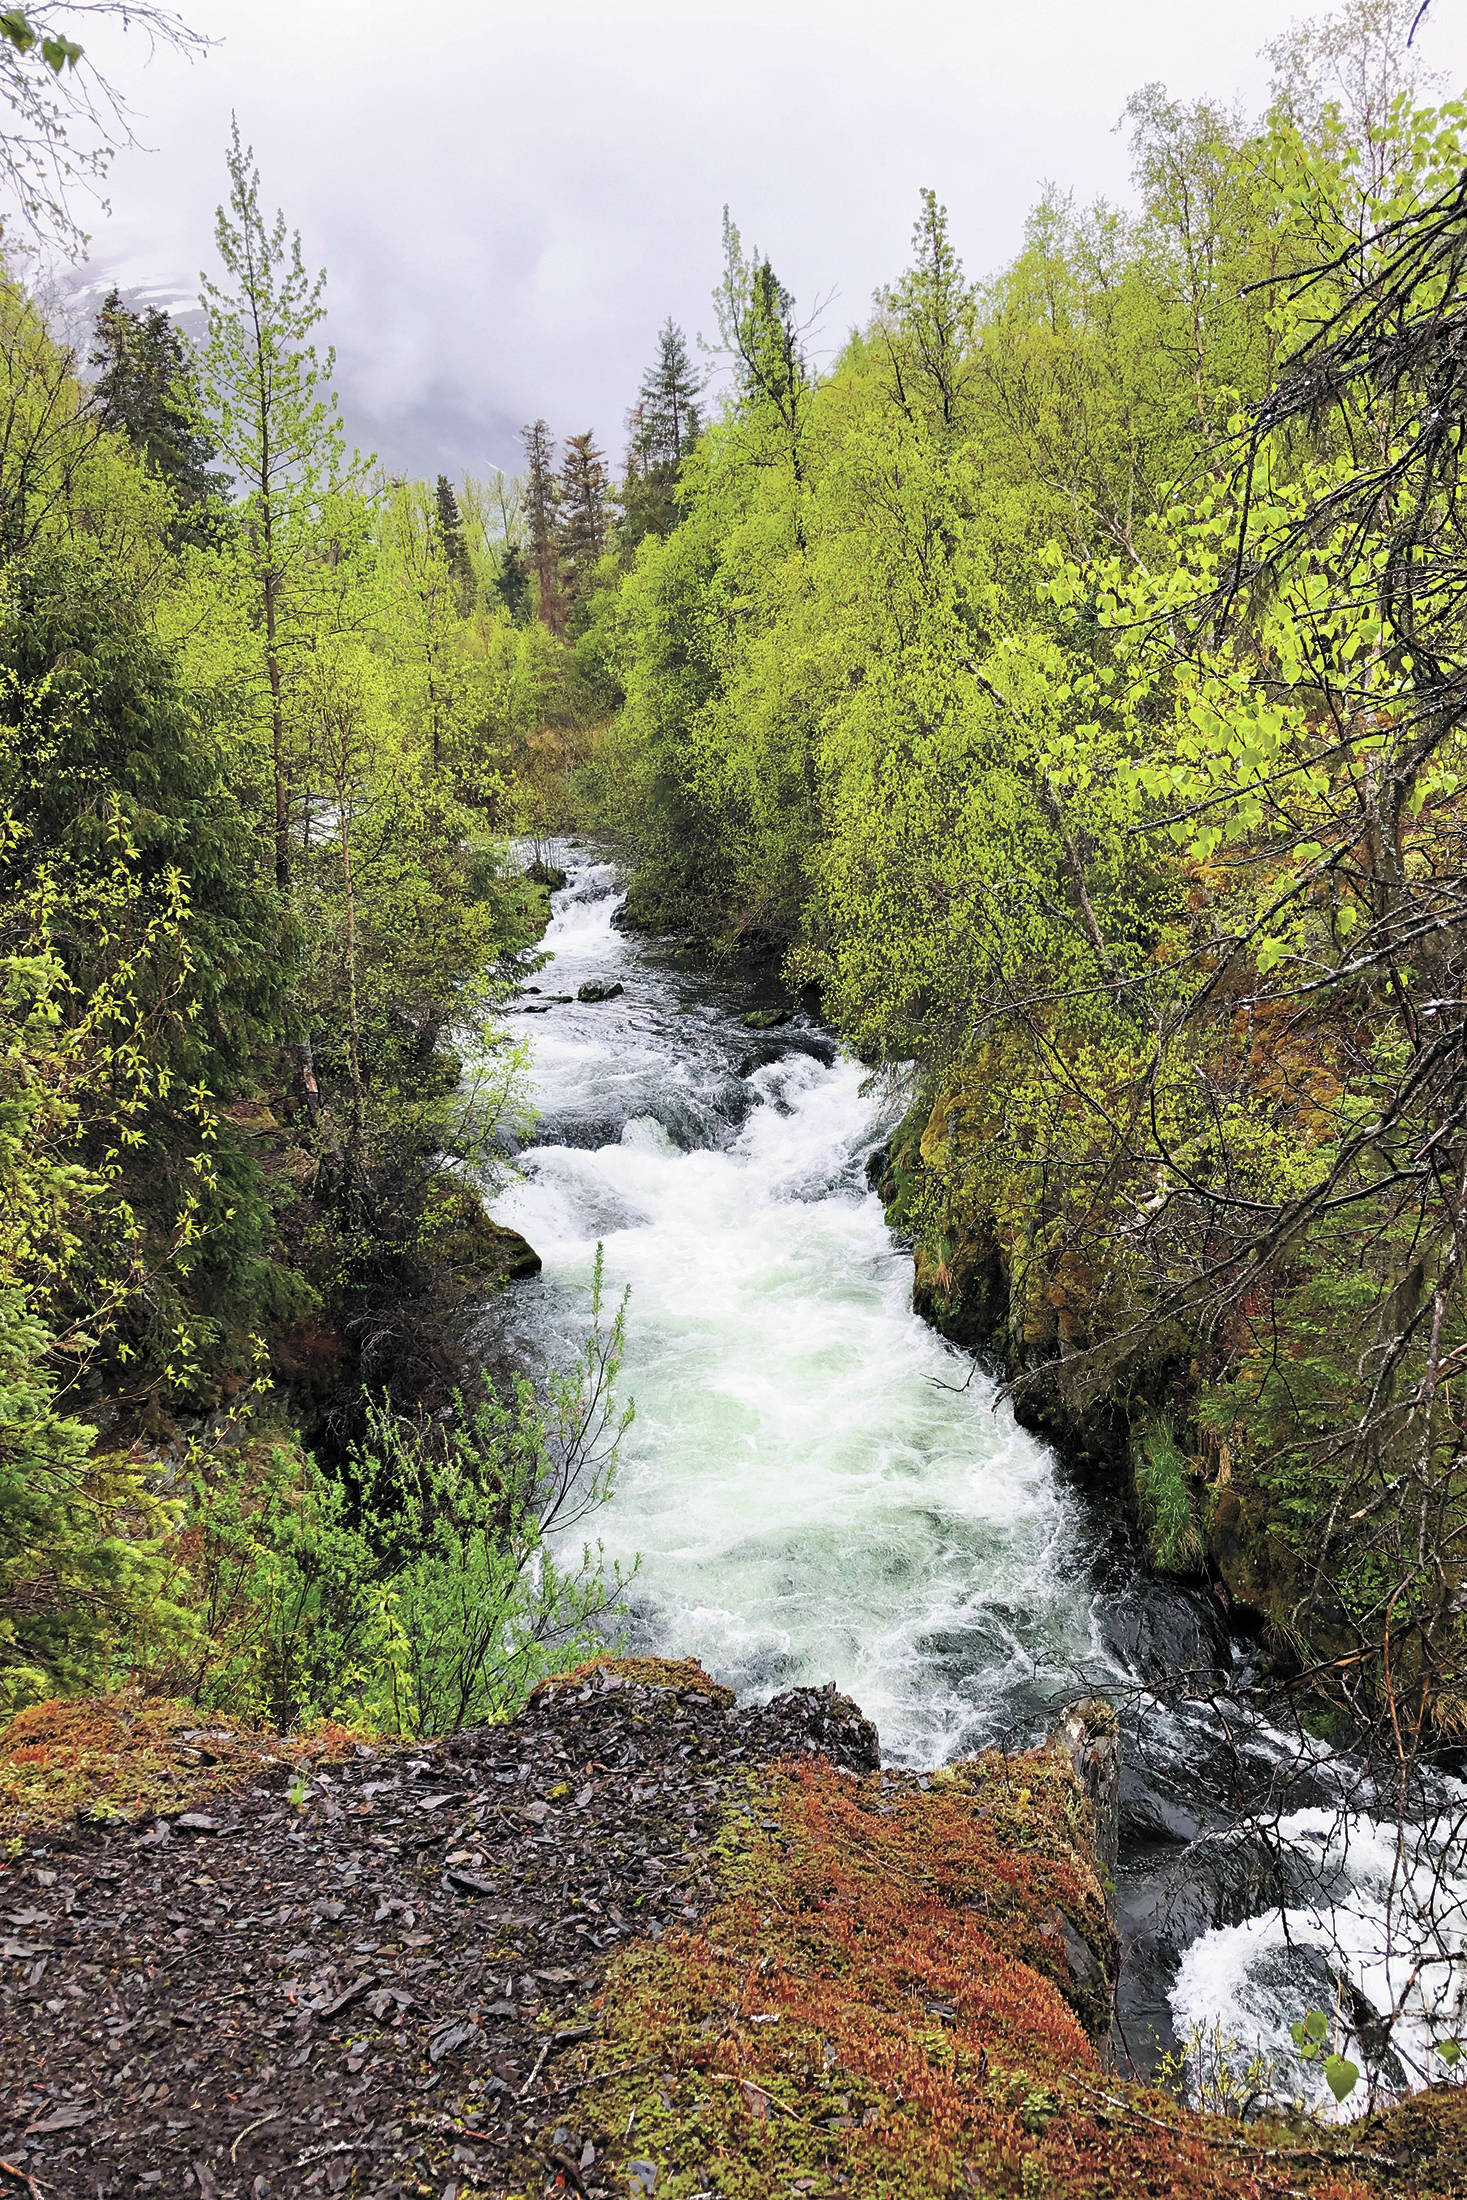 The Russian River Falls flow through the trees on a rainy, overcast Sunday, May 24, 2020 in Cooper Landing, Alaska. (Photo by Megan Pacer/Homer News)